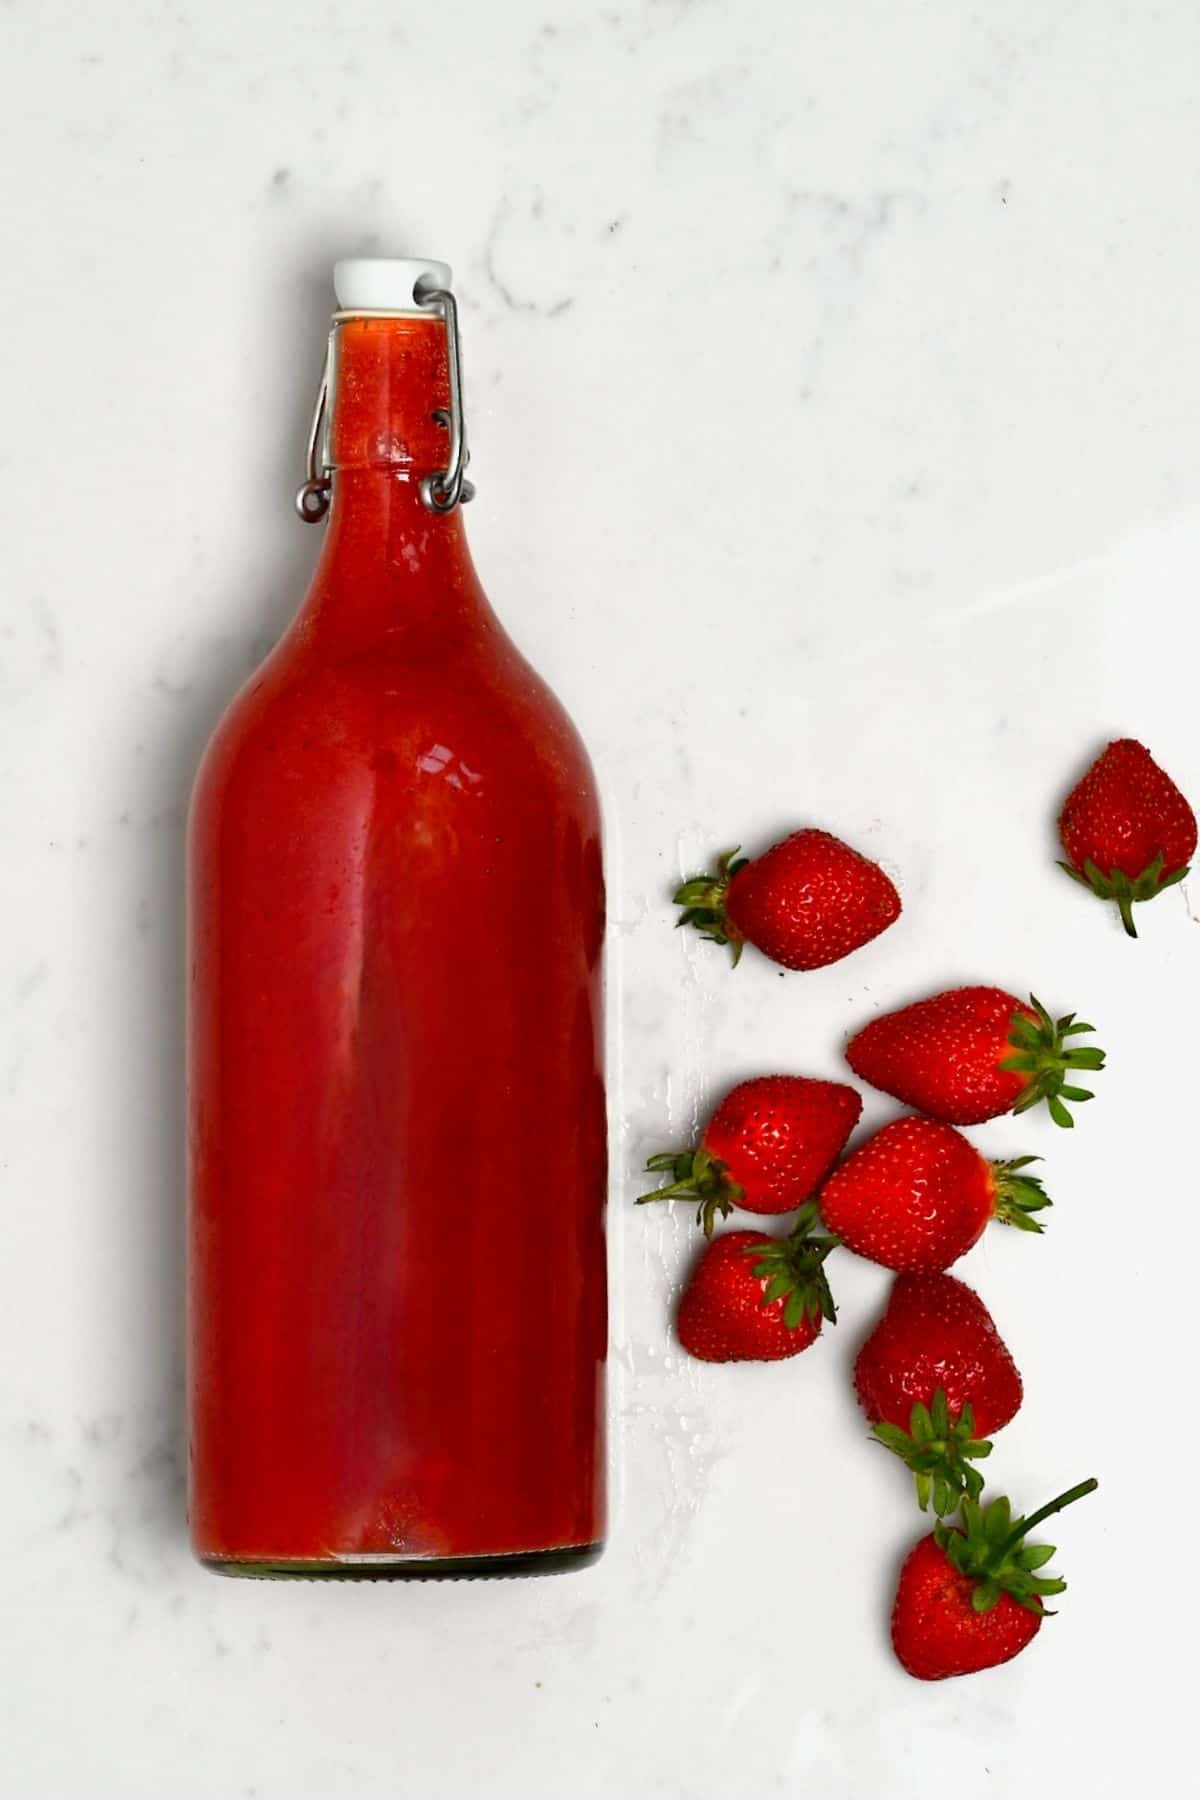 A bottle with strawberry juice and strawberries next to it